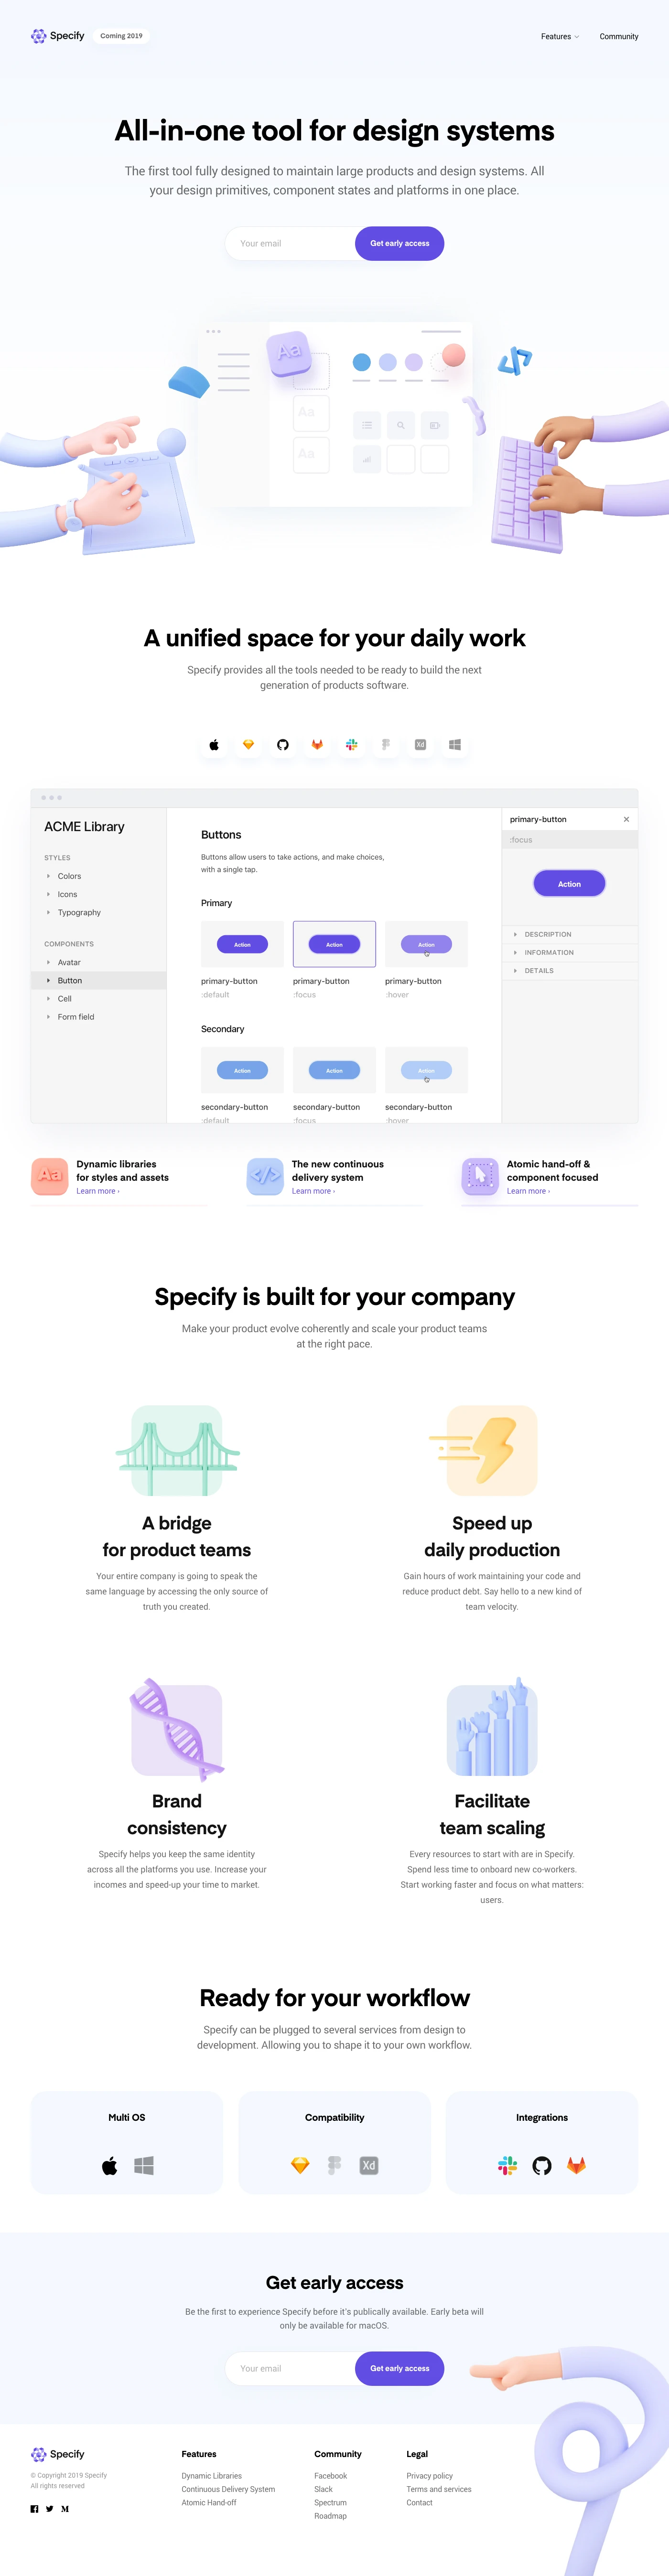 Specify Landing Page Example: Specify is a tool to create, scale and maintain a design system. Meet the ultimate bridge for digital product teams.